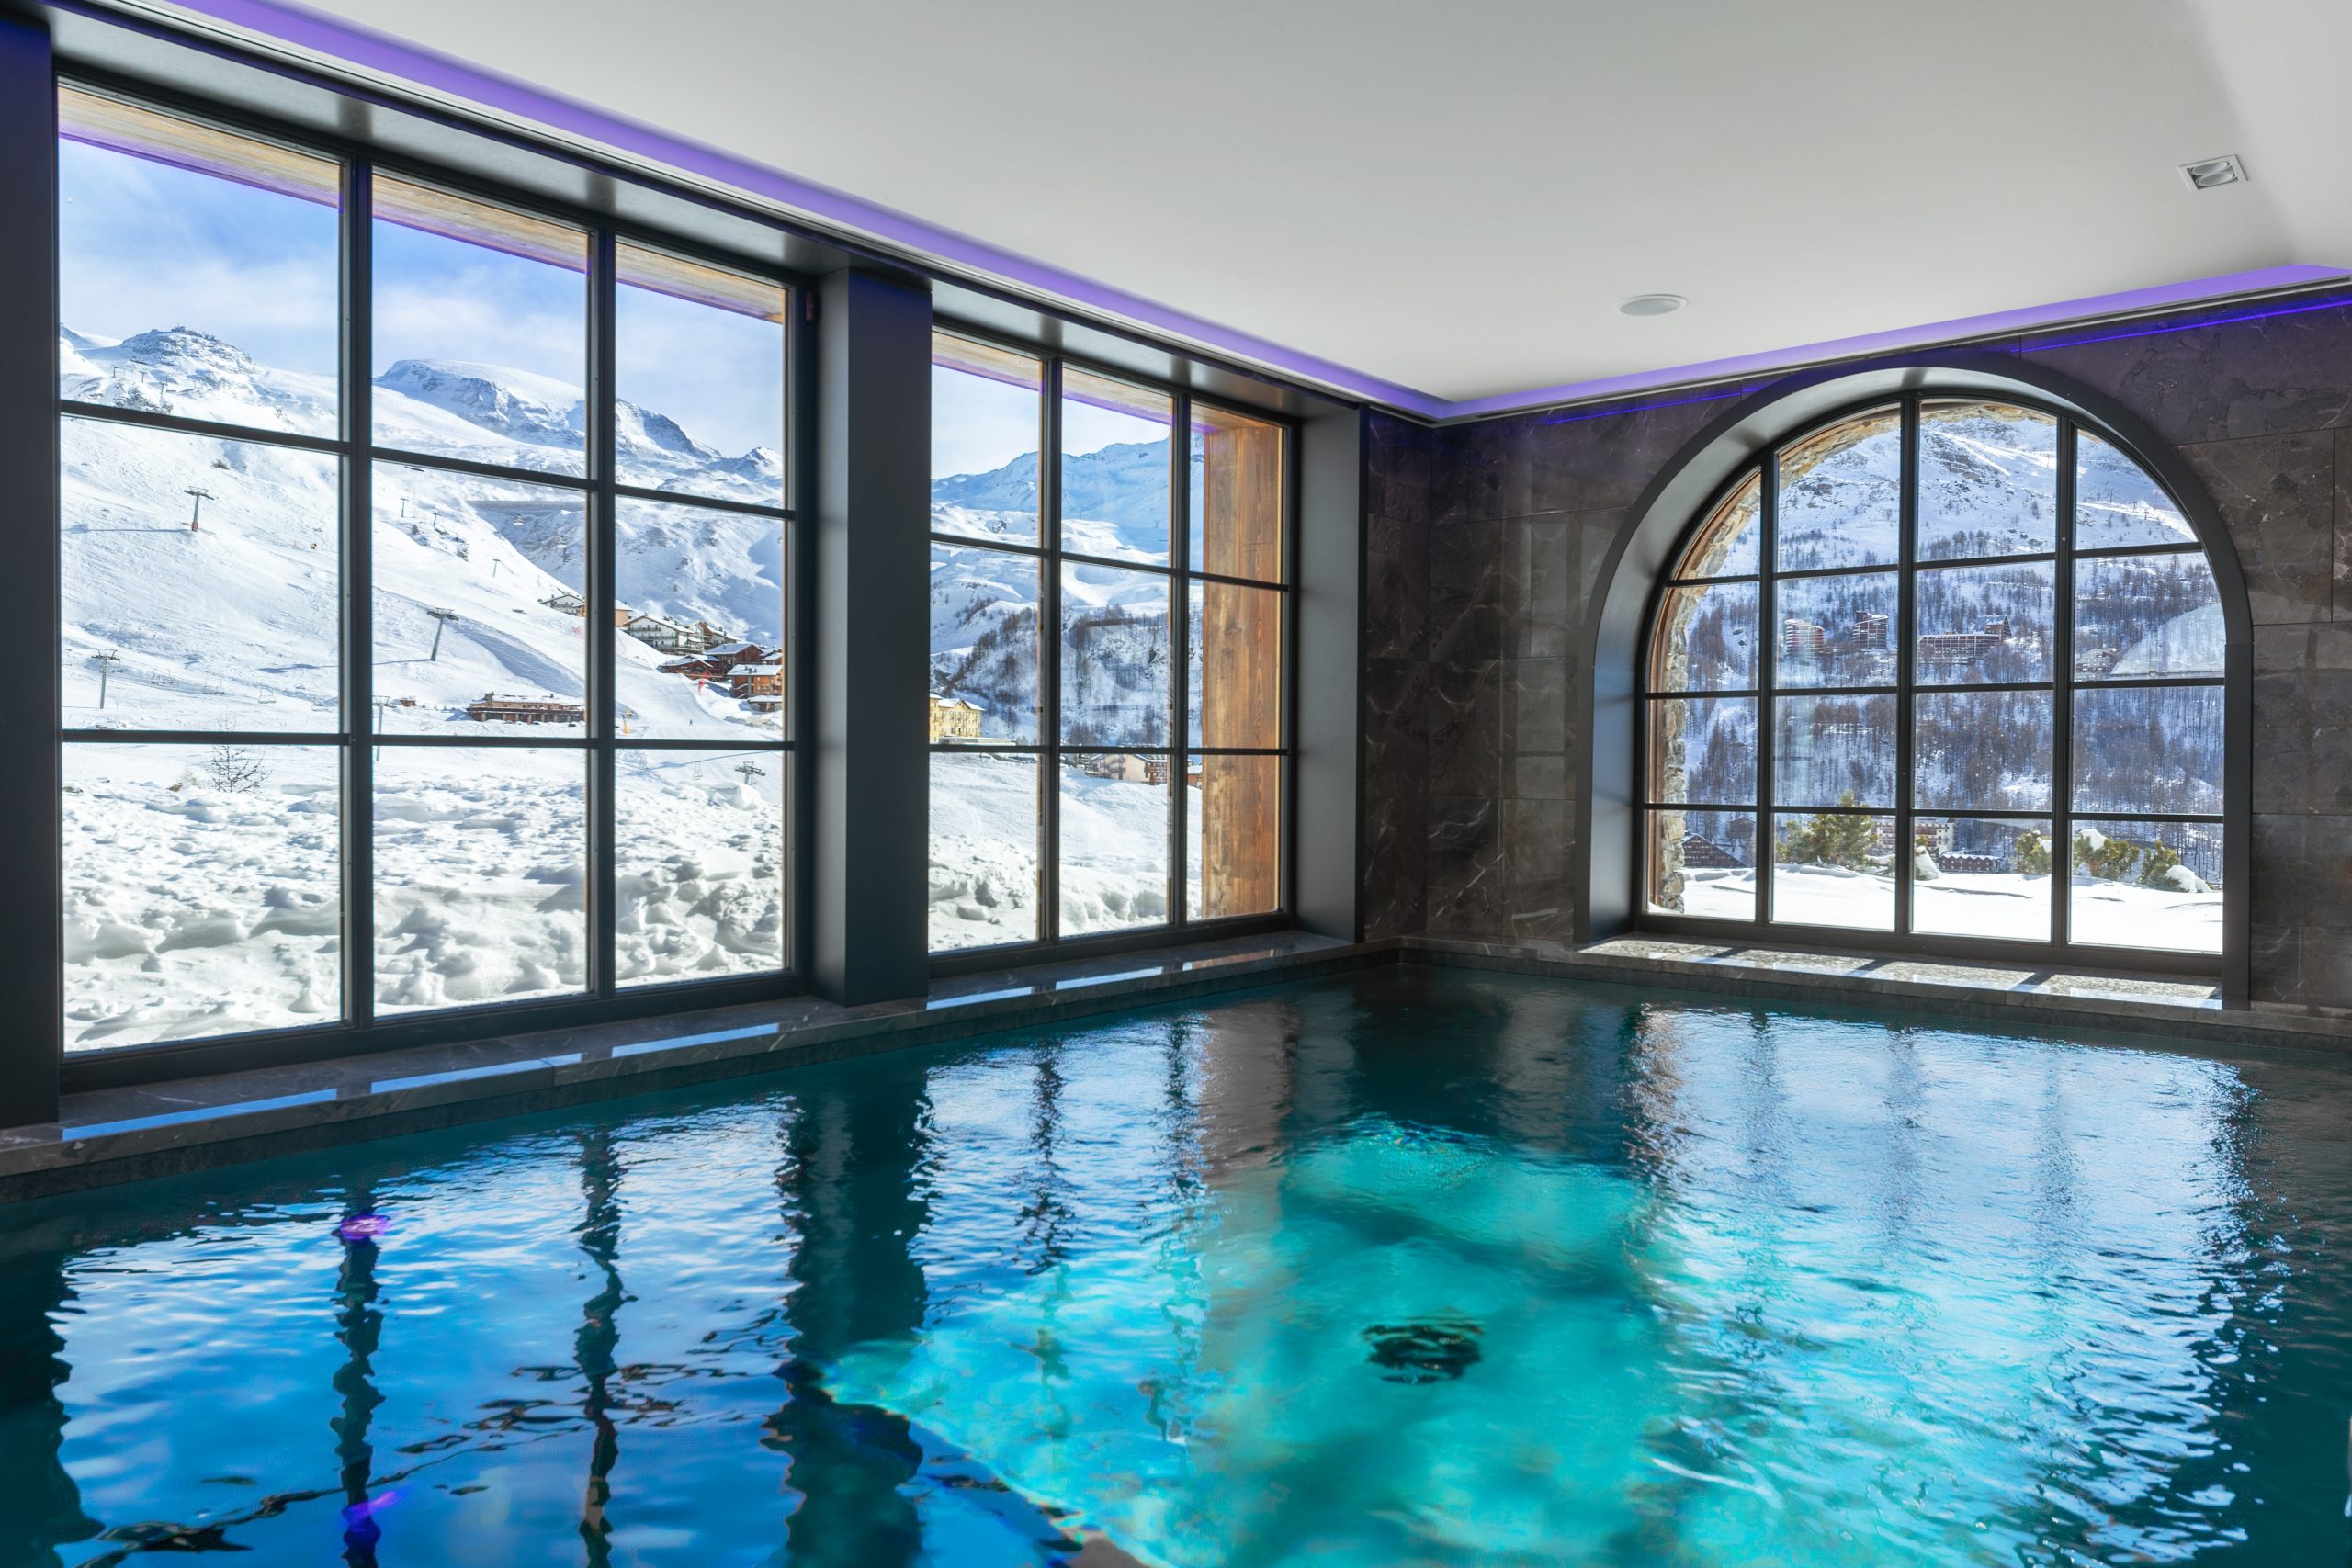 The luxury swimming pool of Chalet La Fenice, a lxuury ski chalet in Cervinia. Outside the tall windows are views of the mountains and the slopes, and the water reflects stylish purple llights.